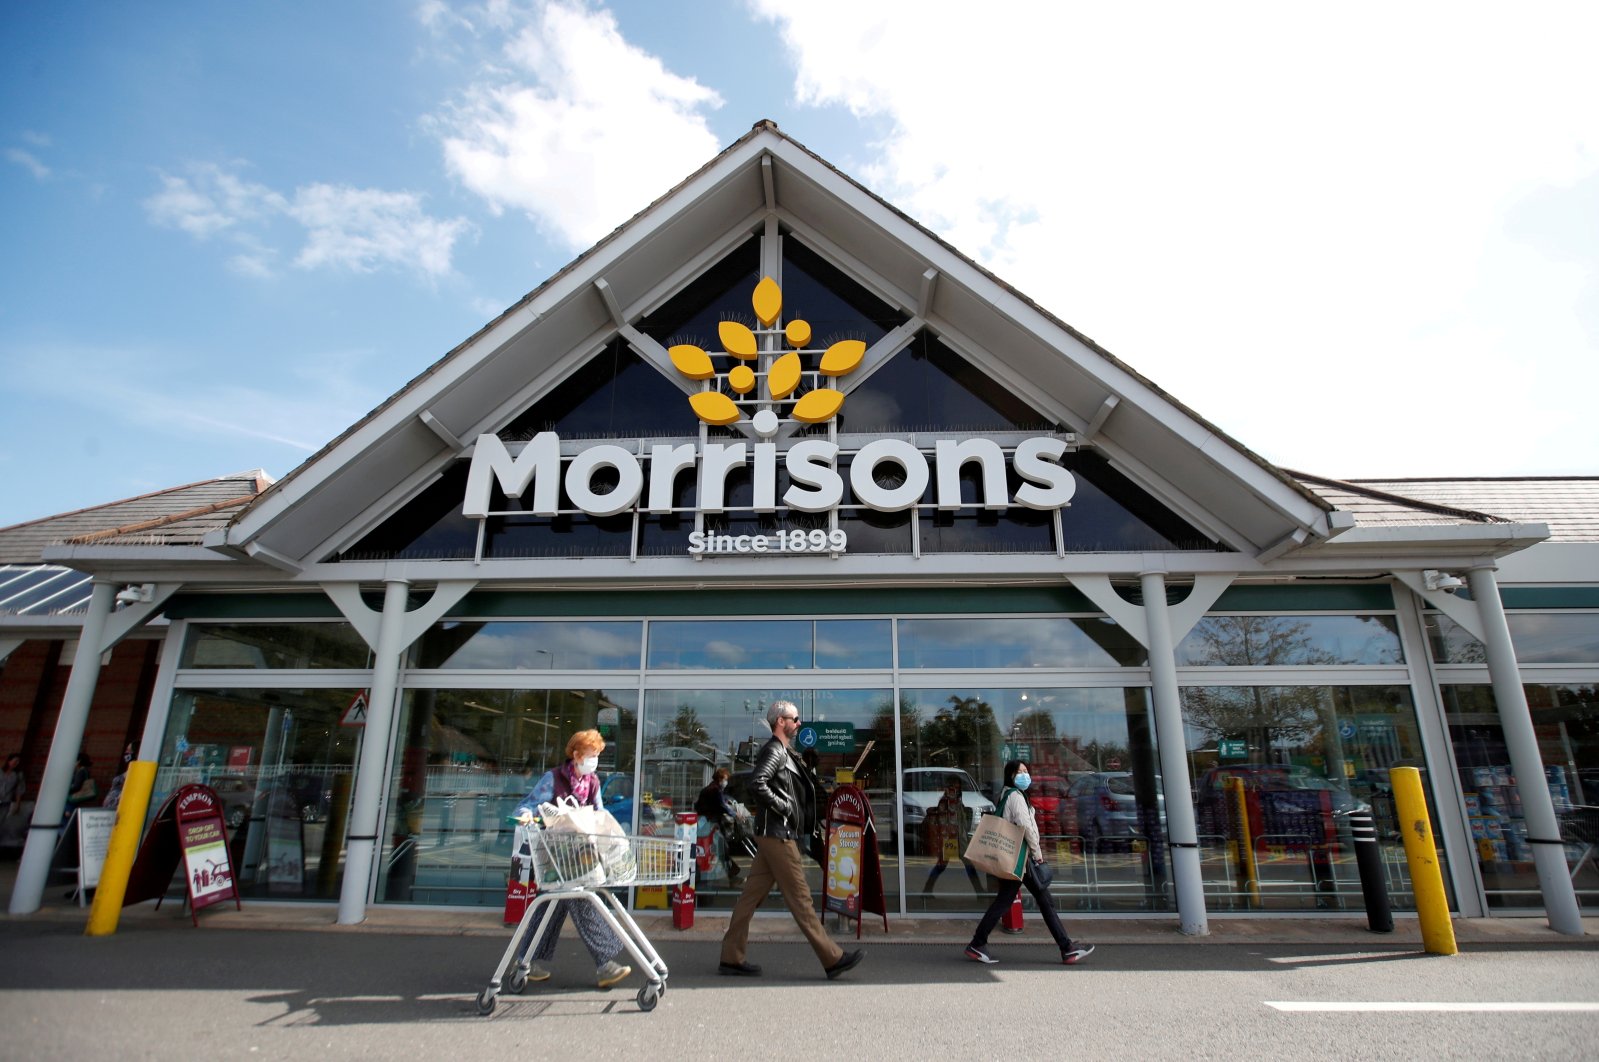 A Morrisons store is pictured in St Albans, U.K., Sept. 10, 2020. (Reuters Photo)